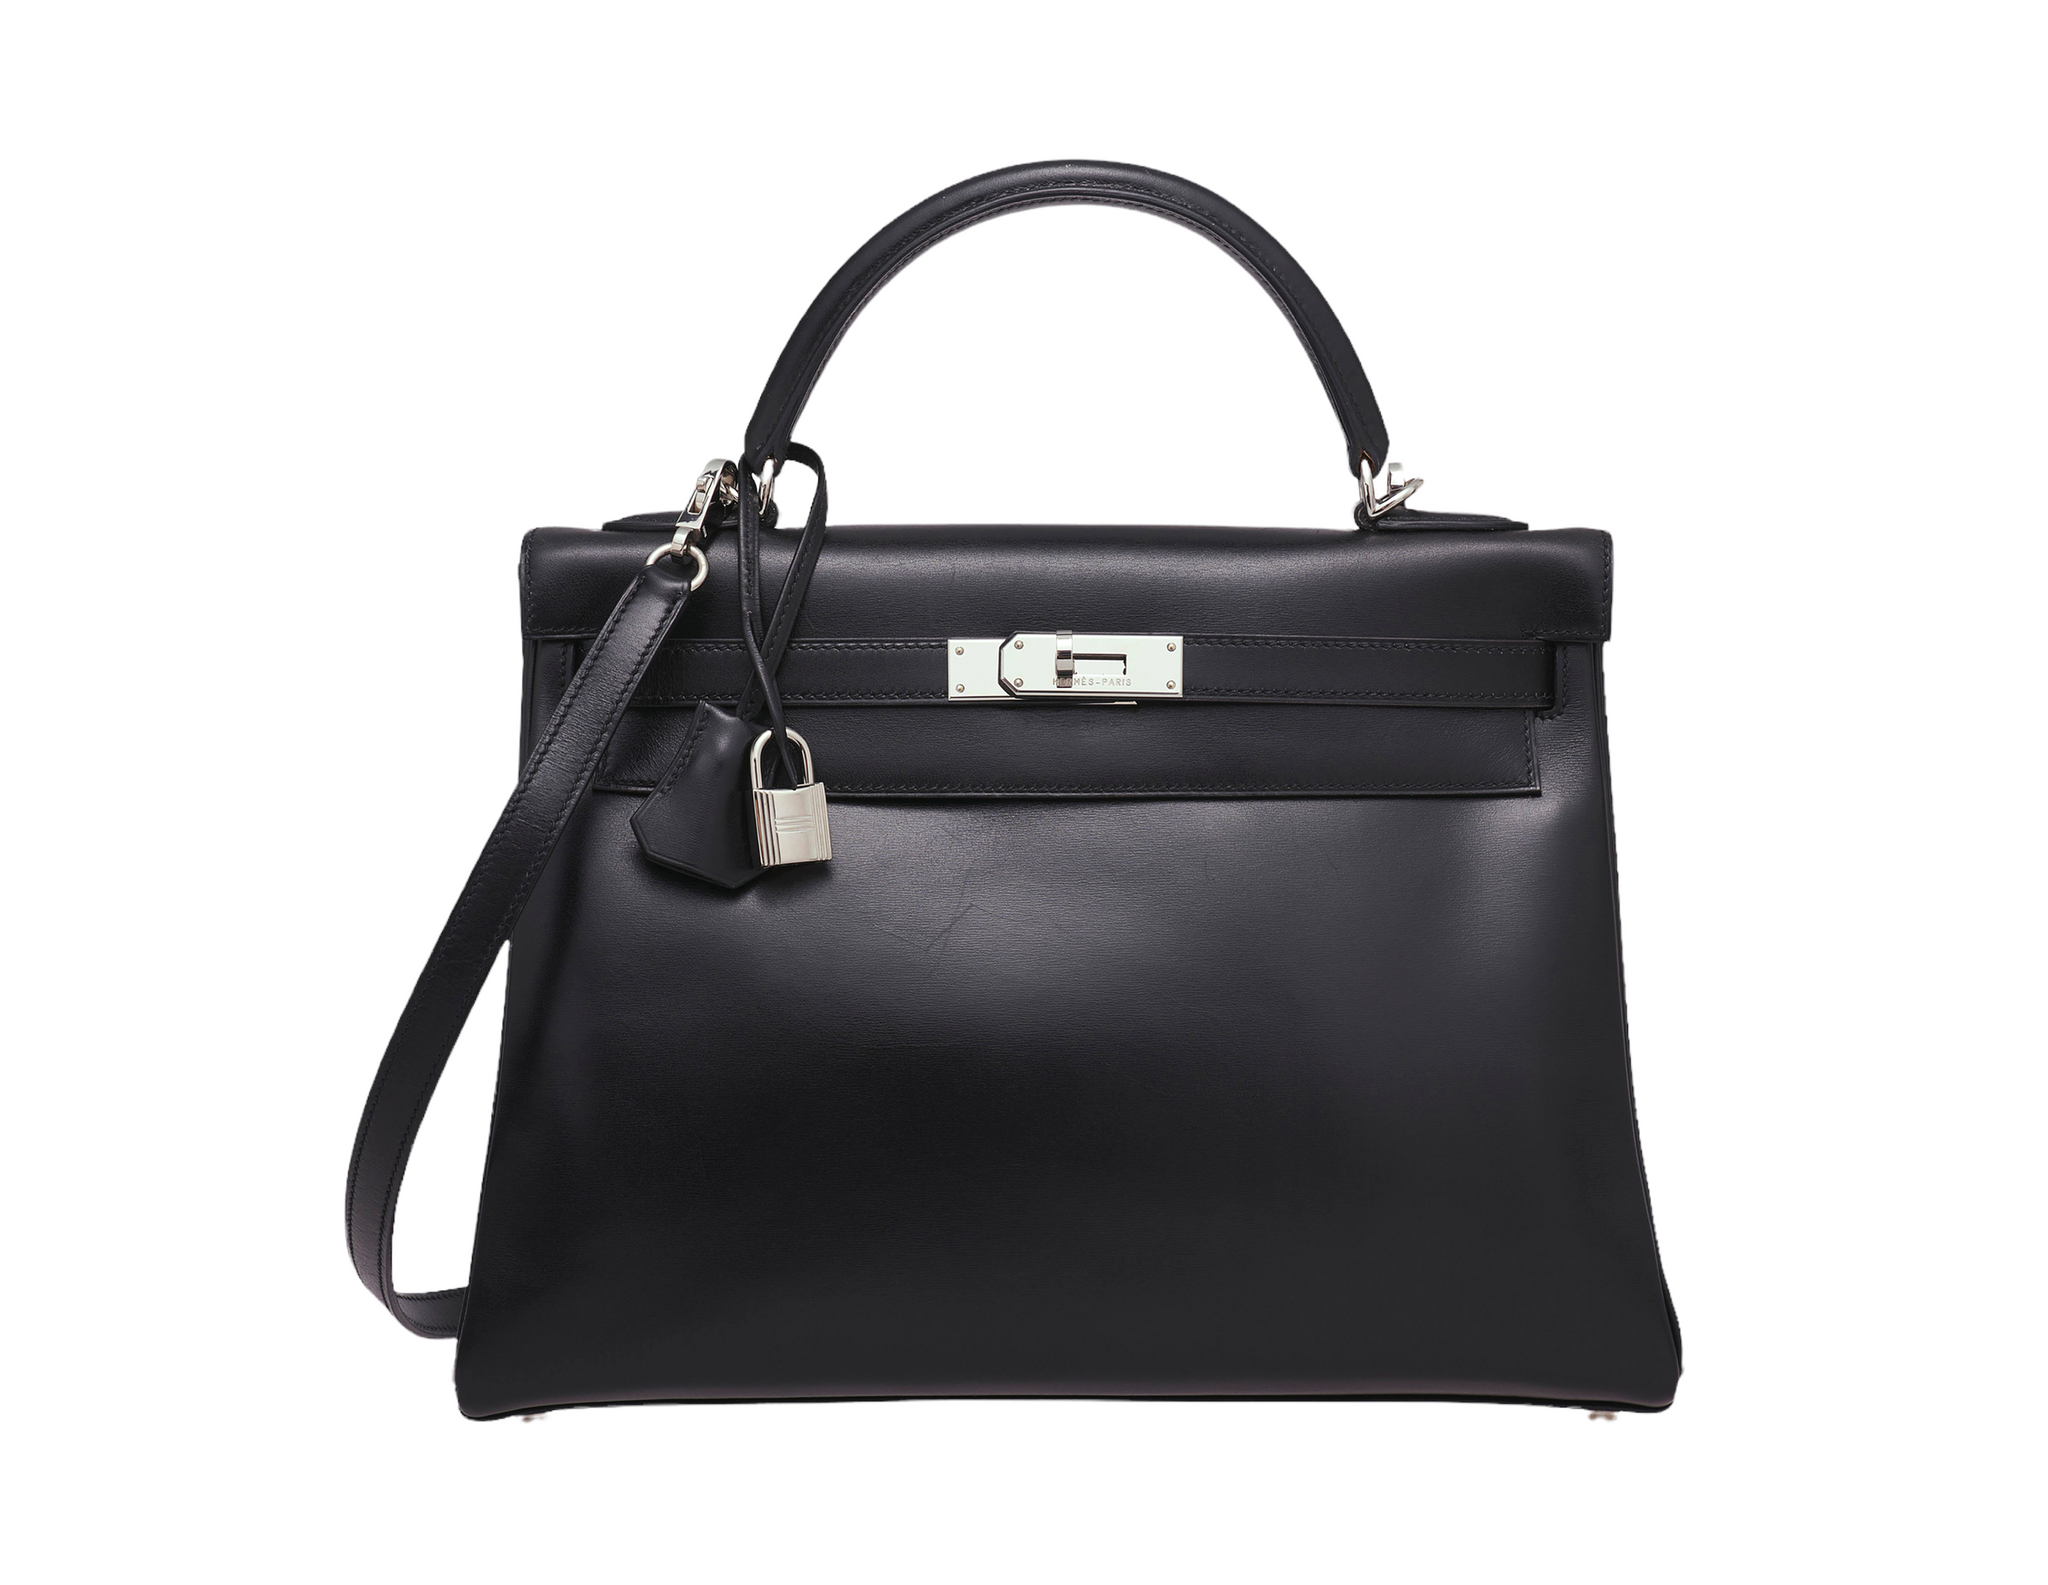 Hermes Kelly Bag 32 Sellier in Black Box Leather **Authentic